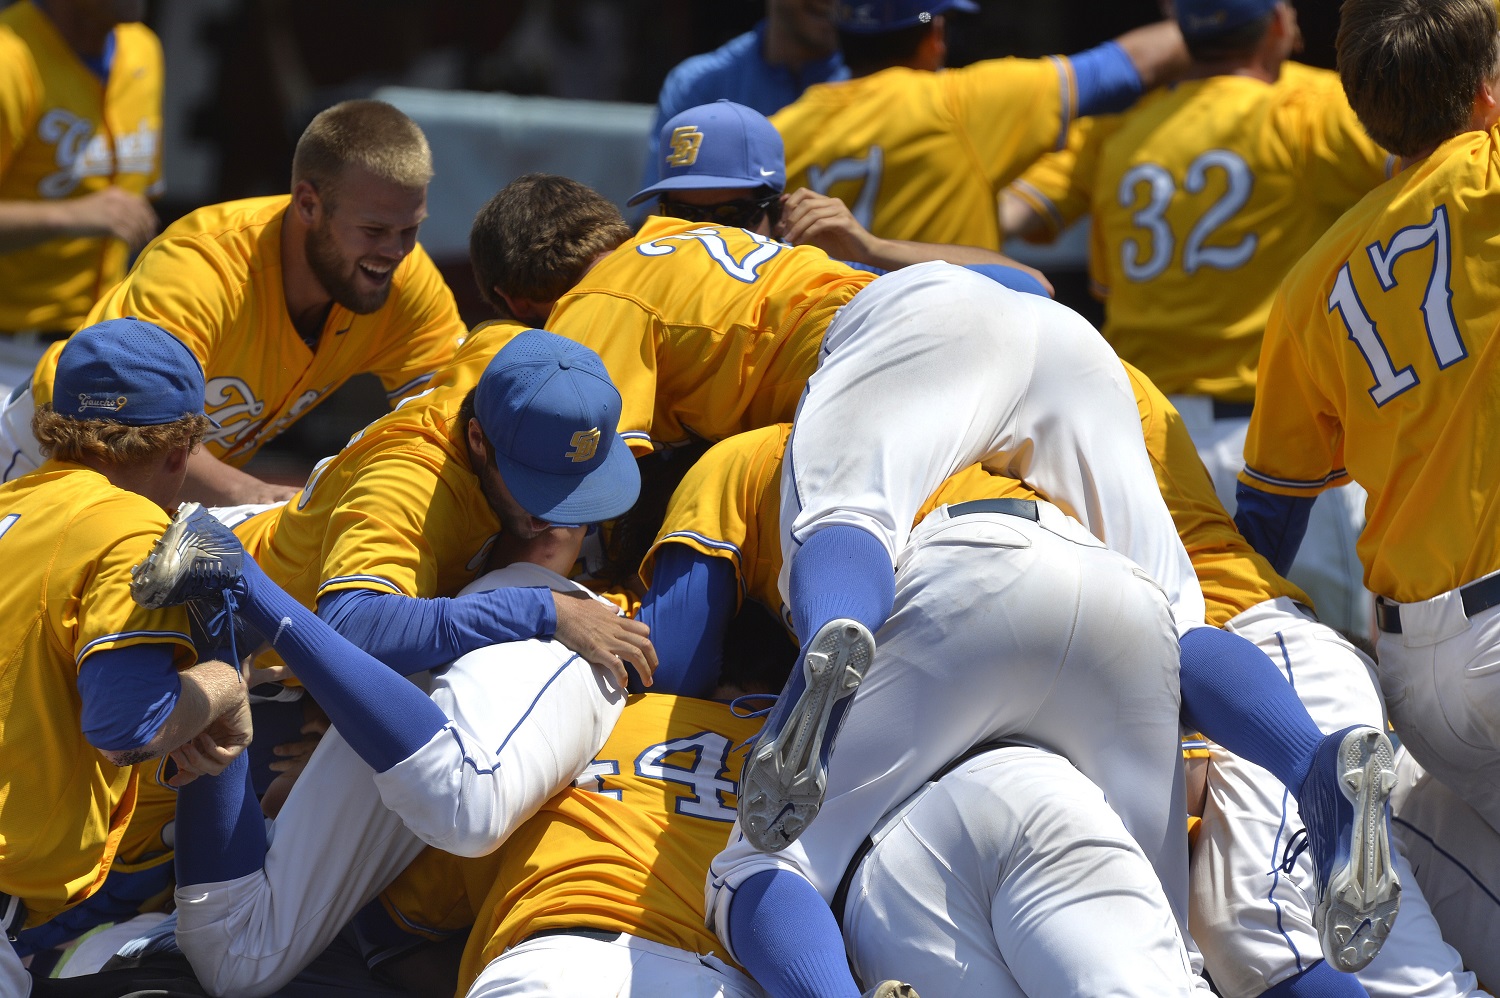 Members of UC Santa Barbara pile onto teammate Sam Cohen following his walkoff grand slam to win an NCAA college baseball tournament super regional game against Louisville, Sunday, June 12, 2016 in Louisville Ky. (AP Photo/Timothy D. Easley)